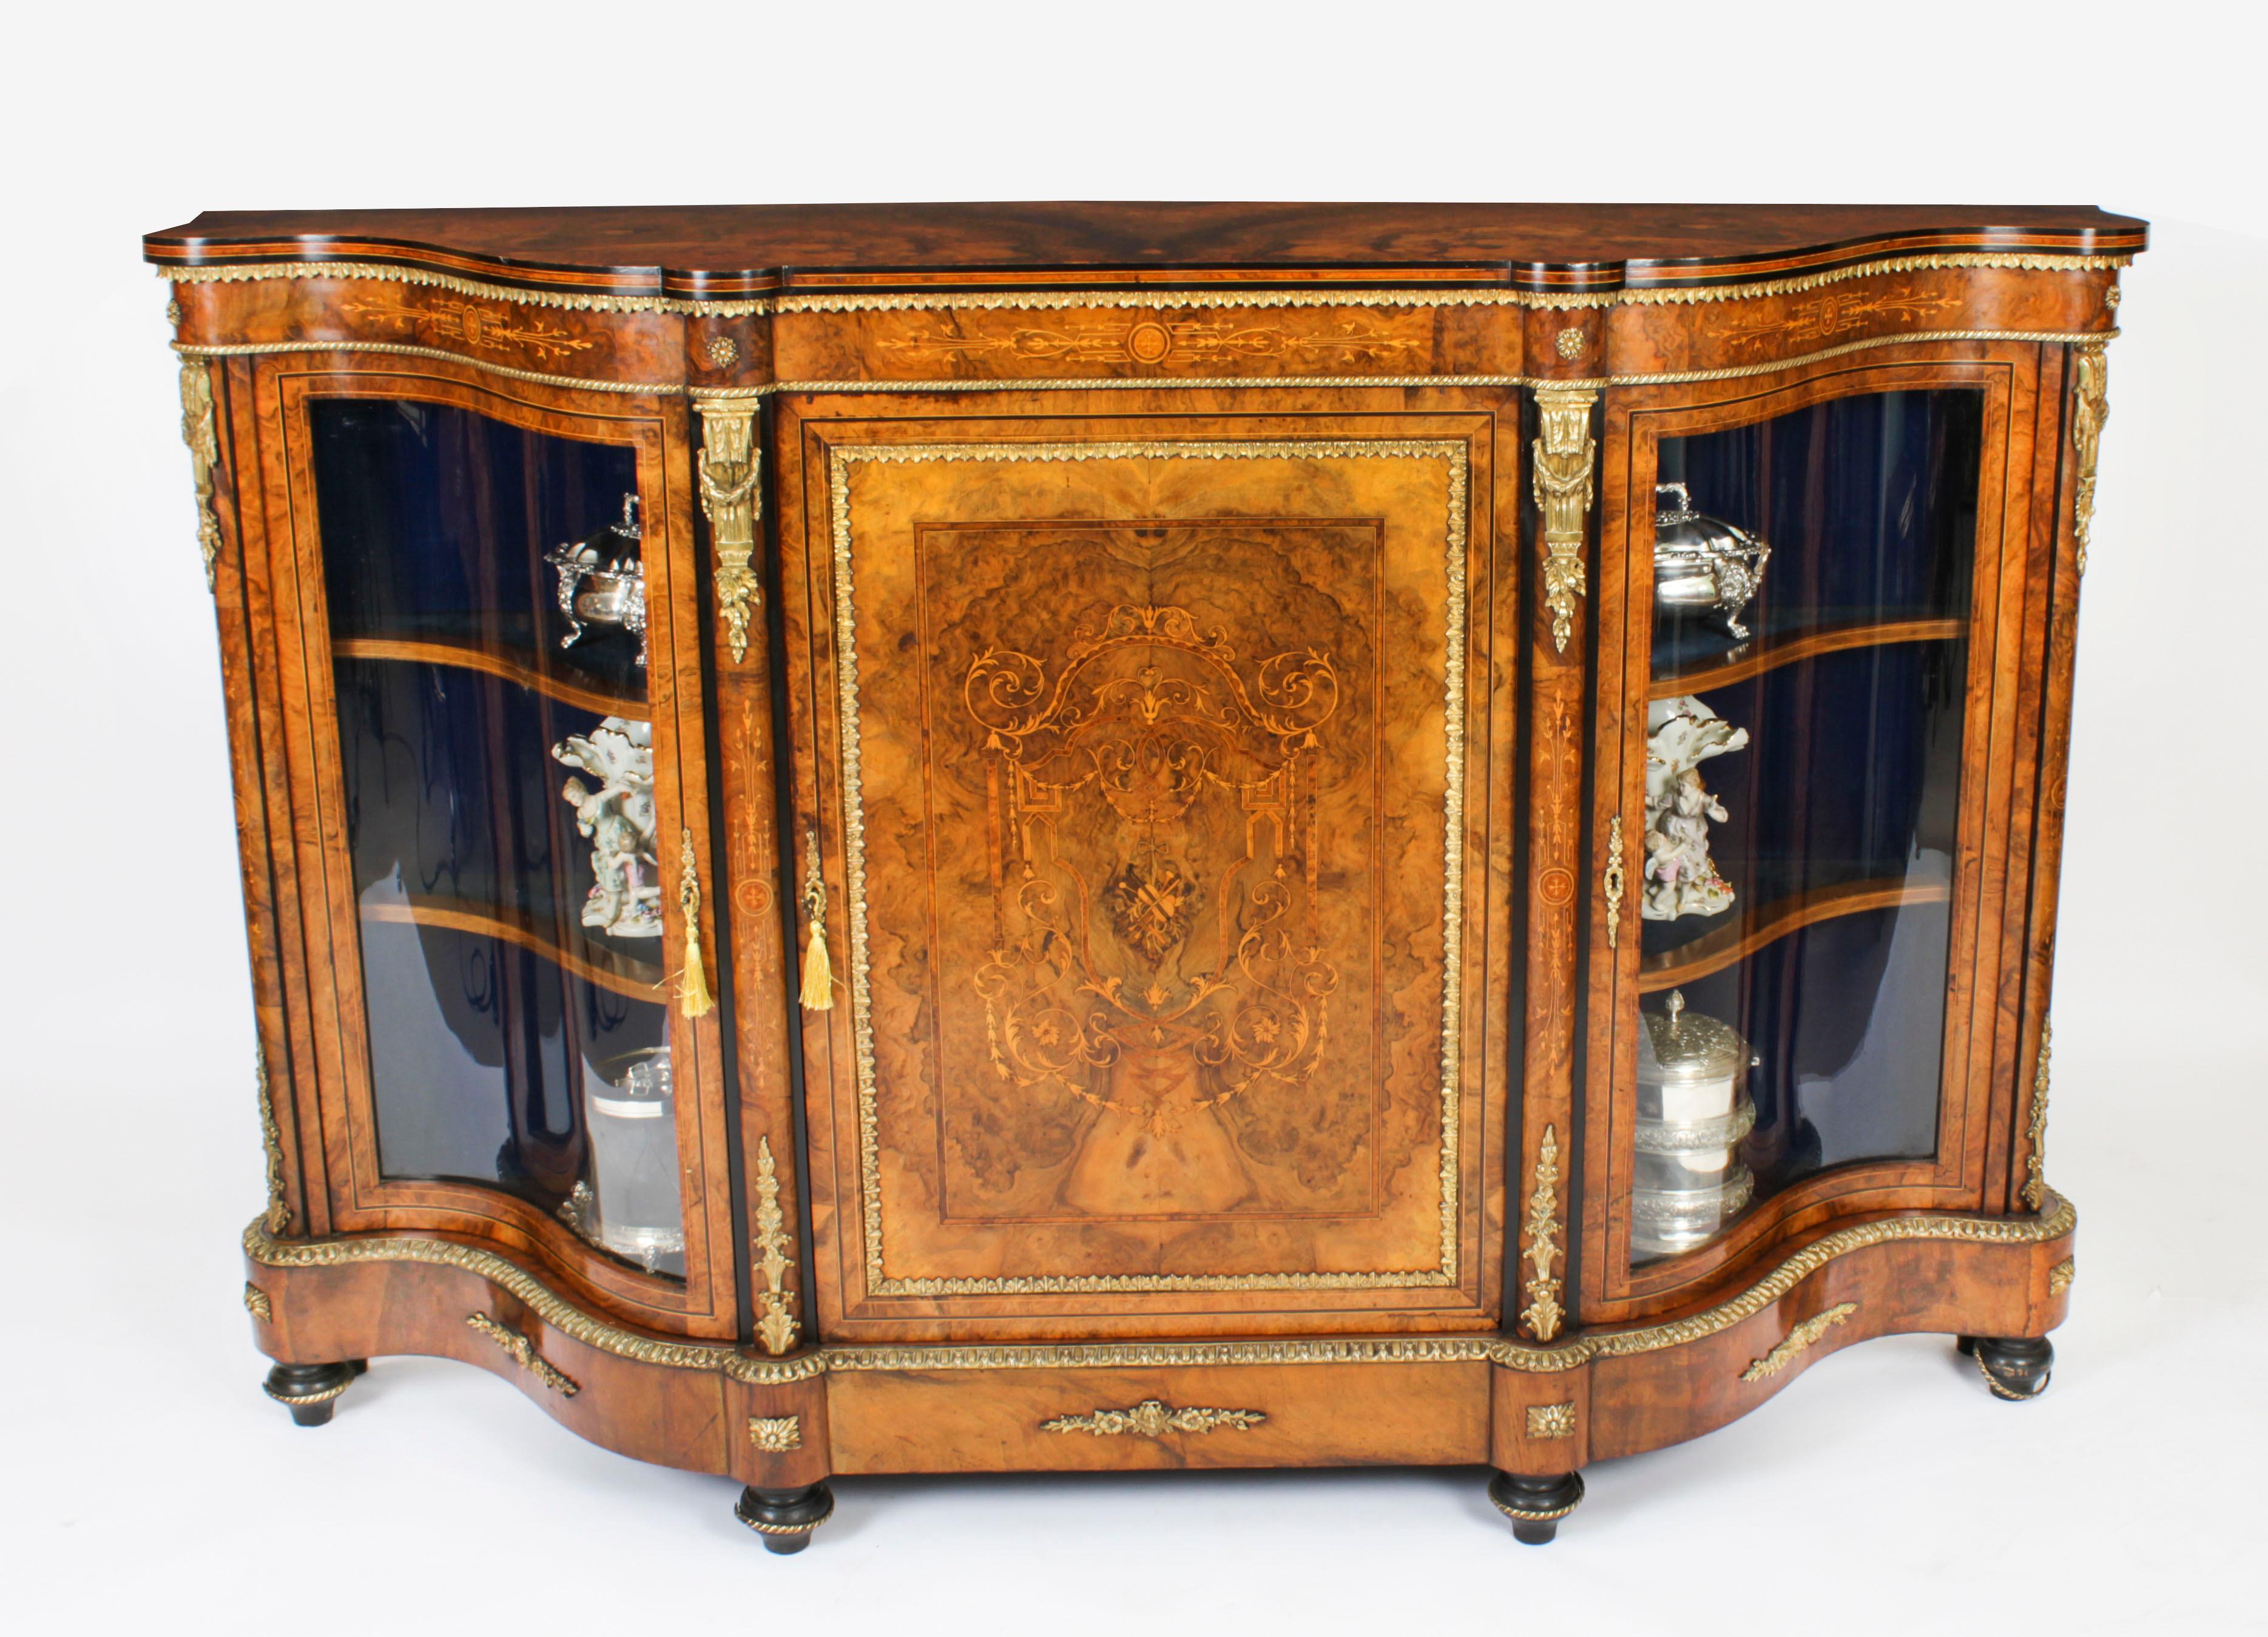 This is an exceptional quality antique Victorian ormolu mounted burr walnut, ebonised and marquetry inlaid serpentine ended credenza, circa 1860 in date.
 
The entire piece highlights the unique and truly exceptional pattern of the book matched